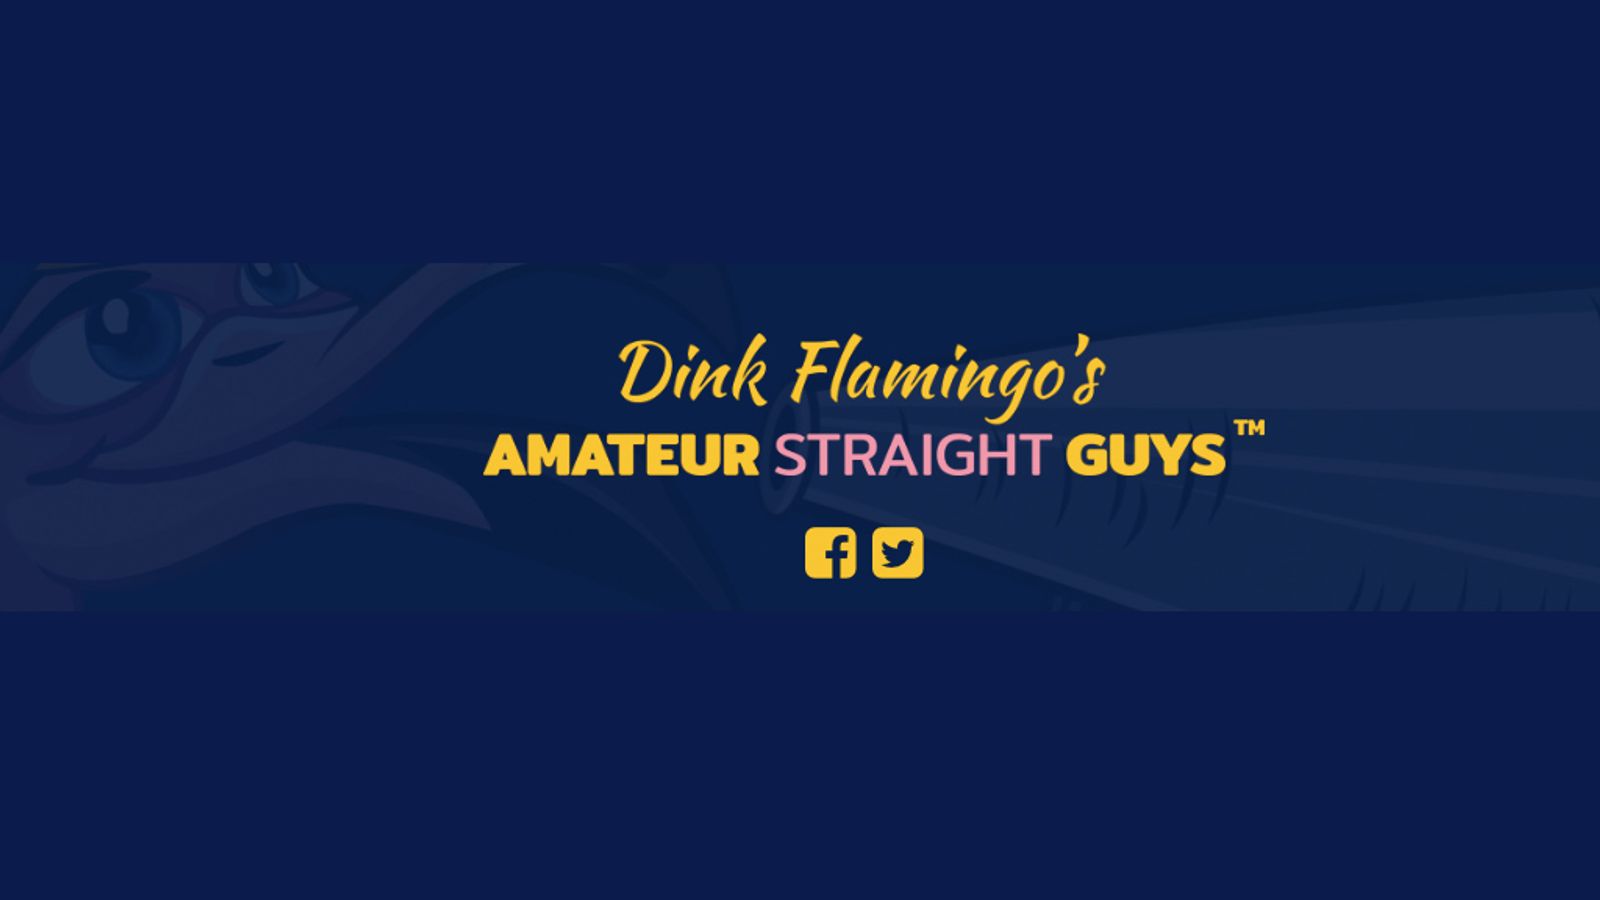 Dink Flamingo Back In Porn, Takes Over Amateur Straight Guys